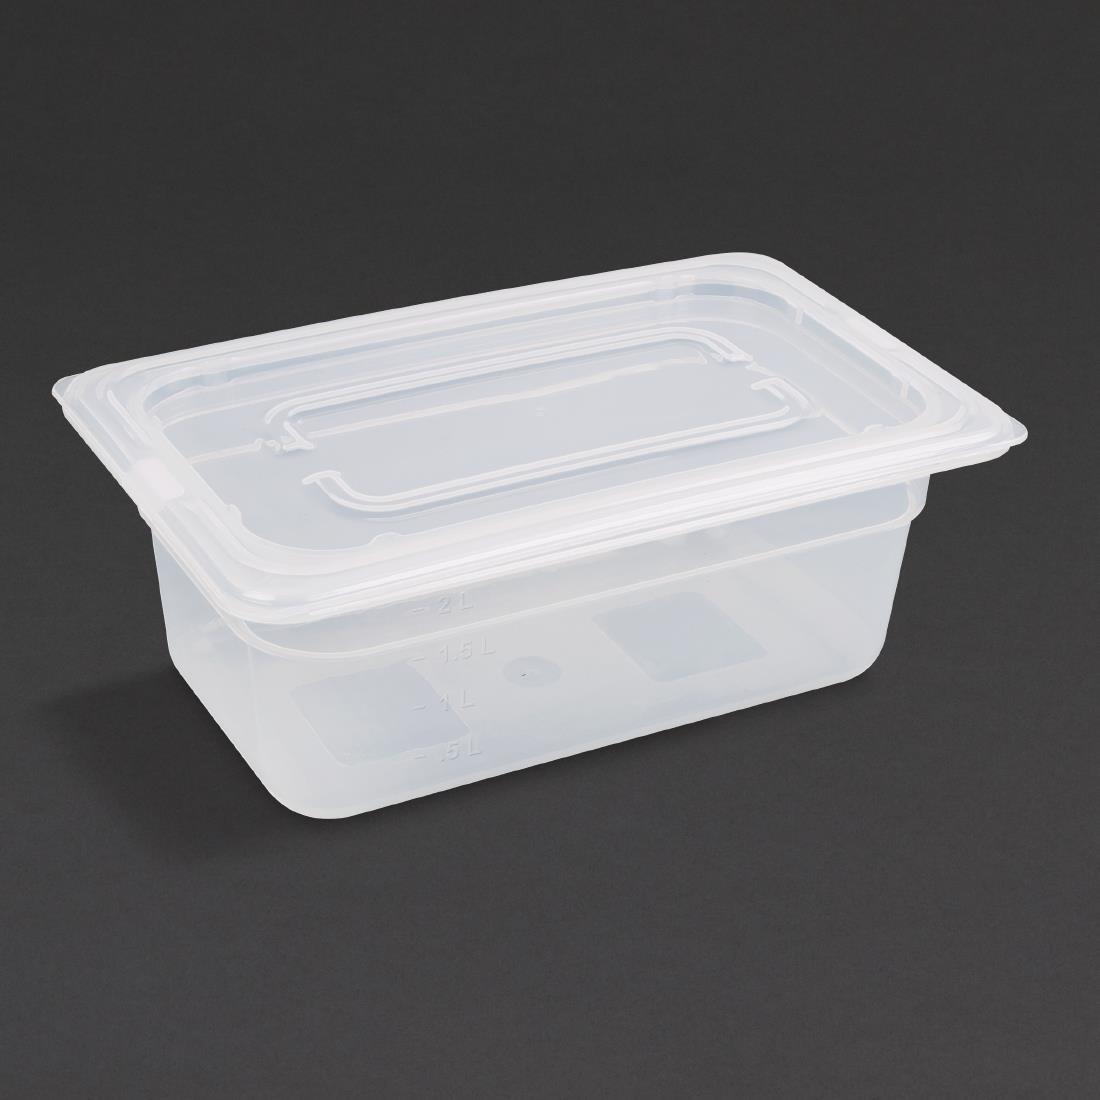 Vogue Polypropylene 1/4 Gastronorm Container with Lid 100mm (Pack of 4) - GJ523  - 1